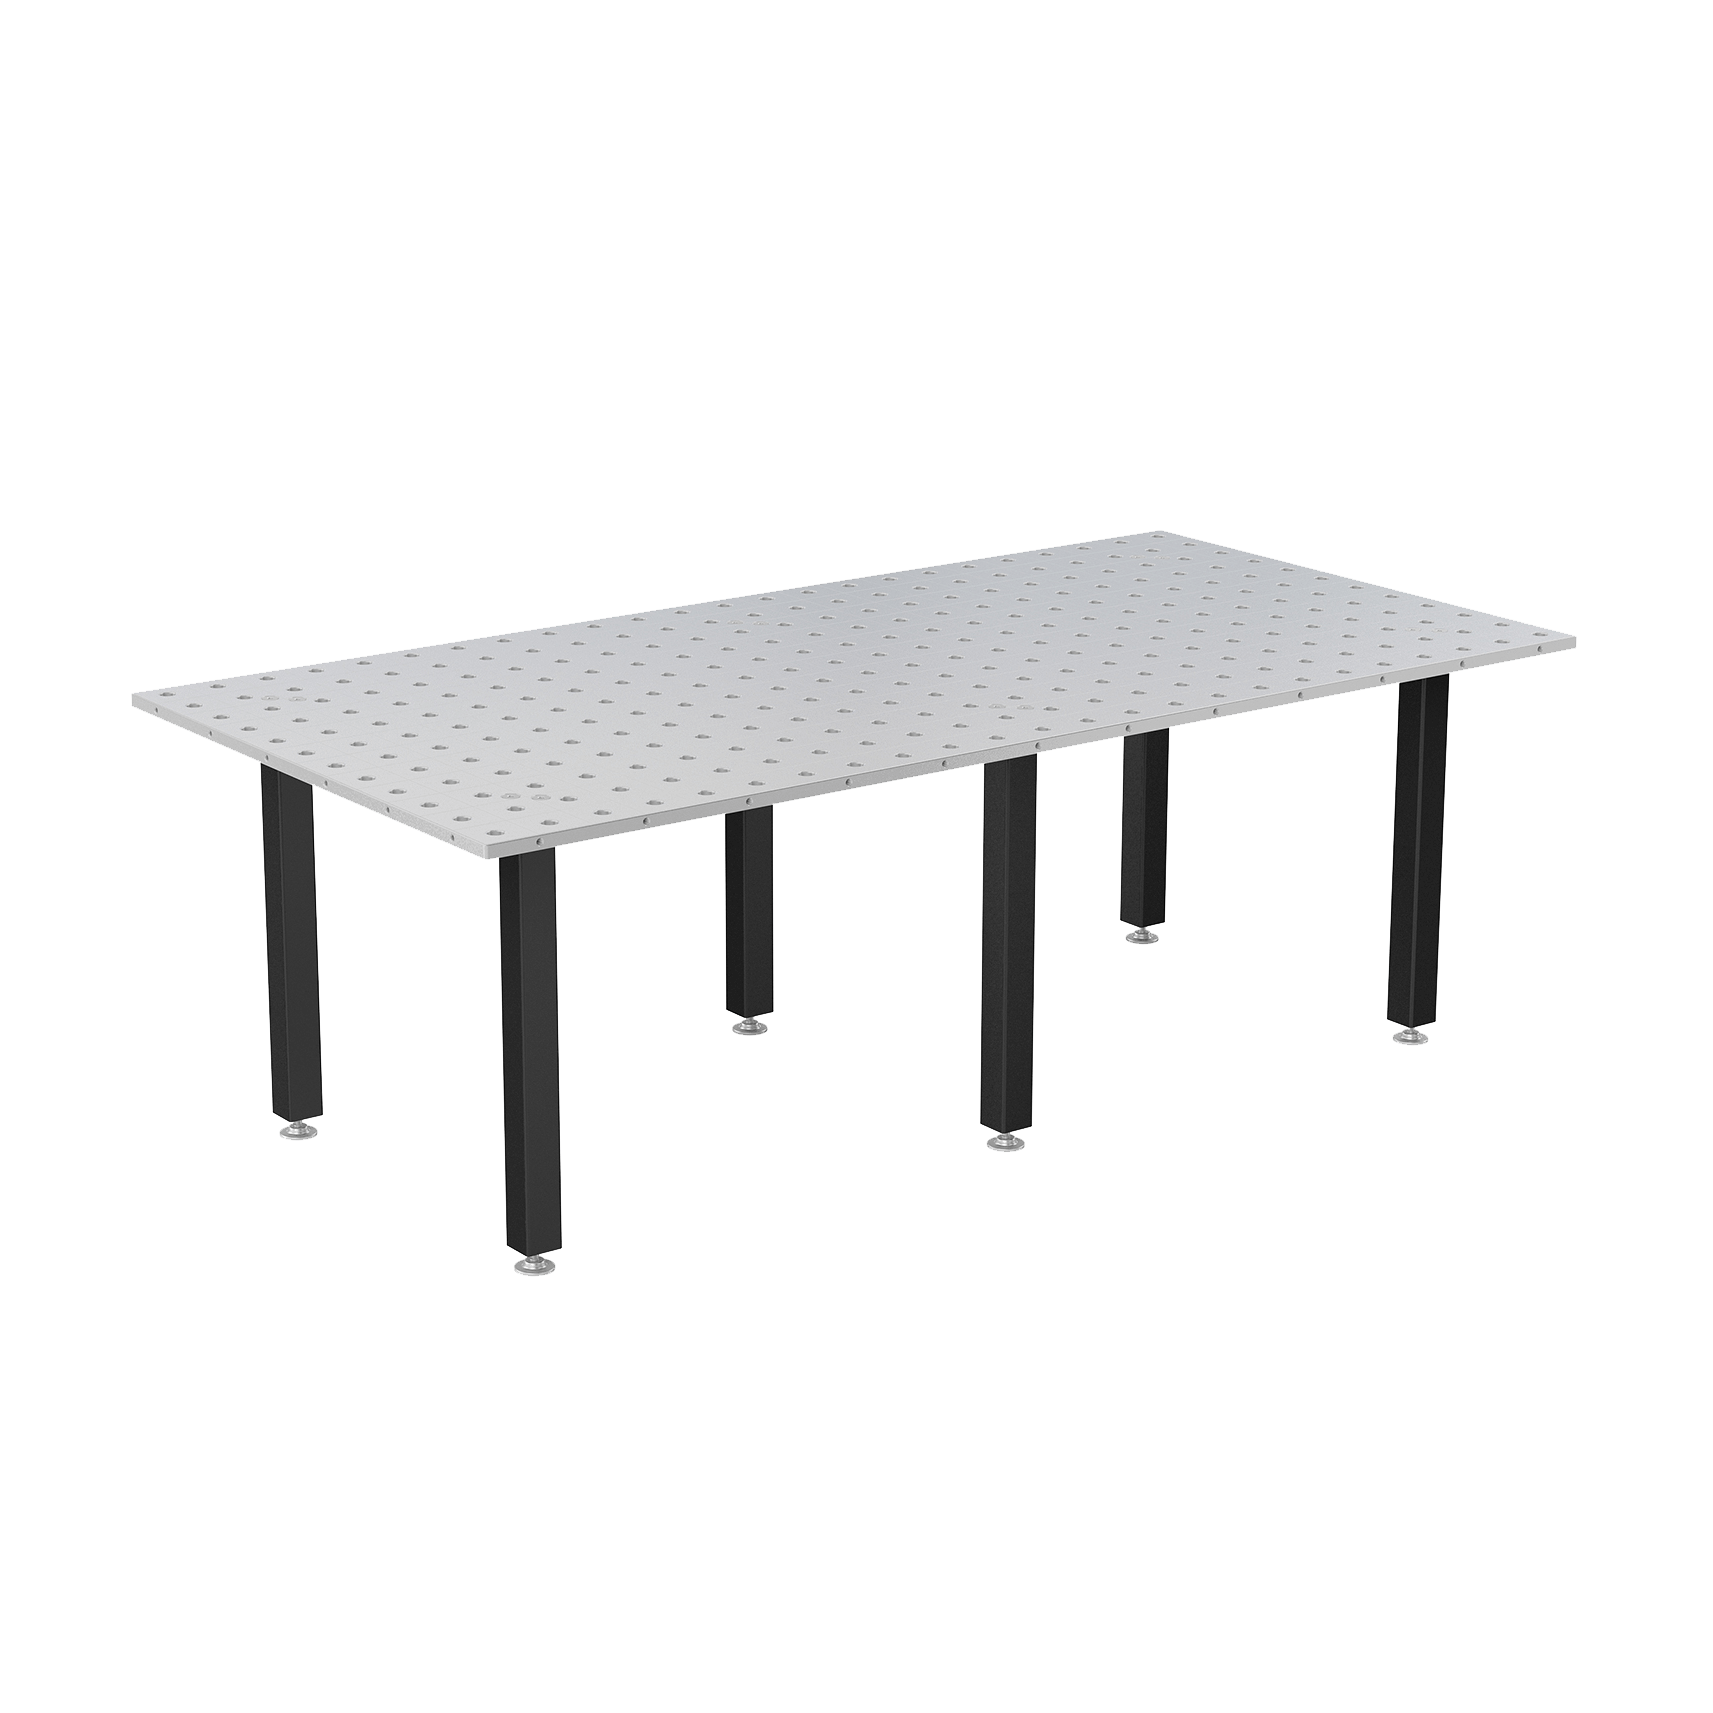 System 28 2400x1200mm (94"x47") Siegmund "BASIC" Welding Table (Item No. 4-281030) - Siegmund Welding Tables and Fixtures USA - A Division of Quantum Machinery Group